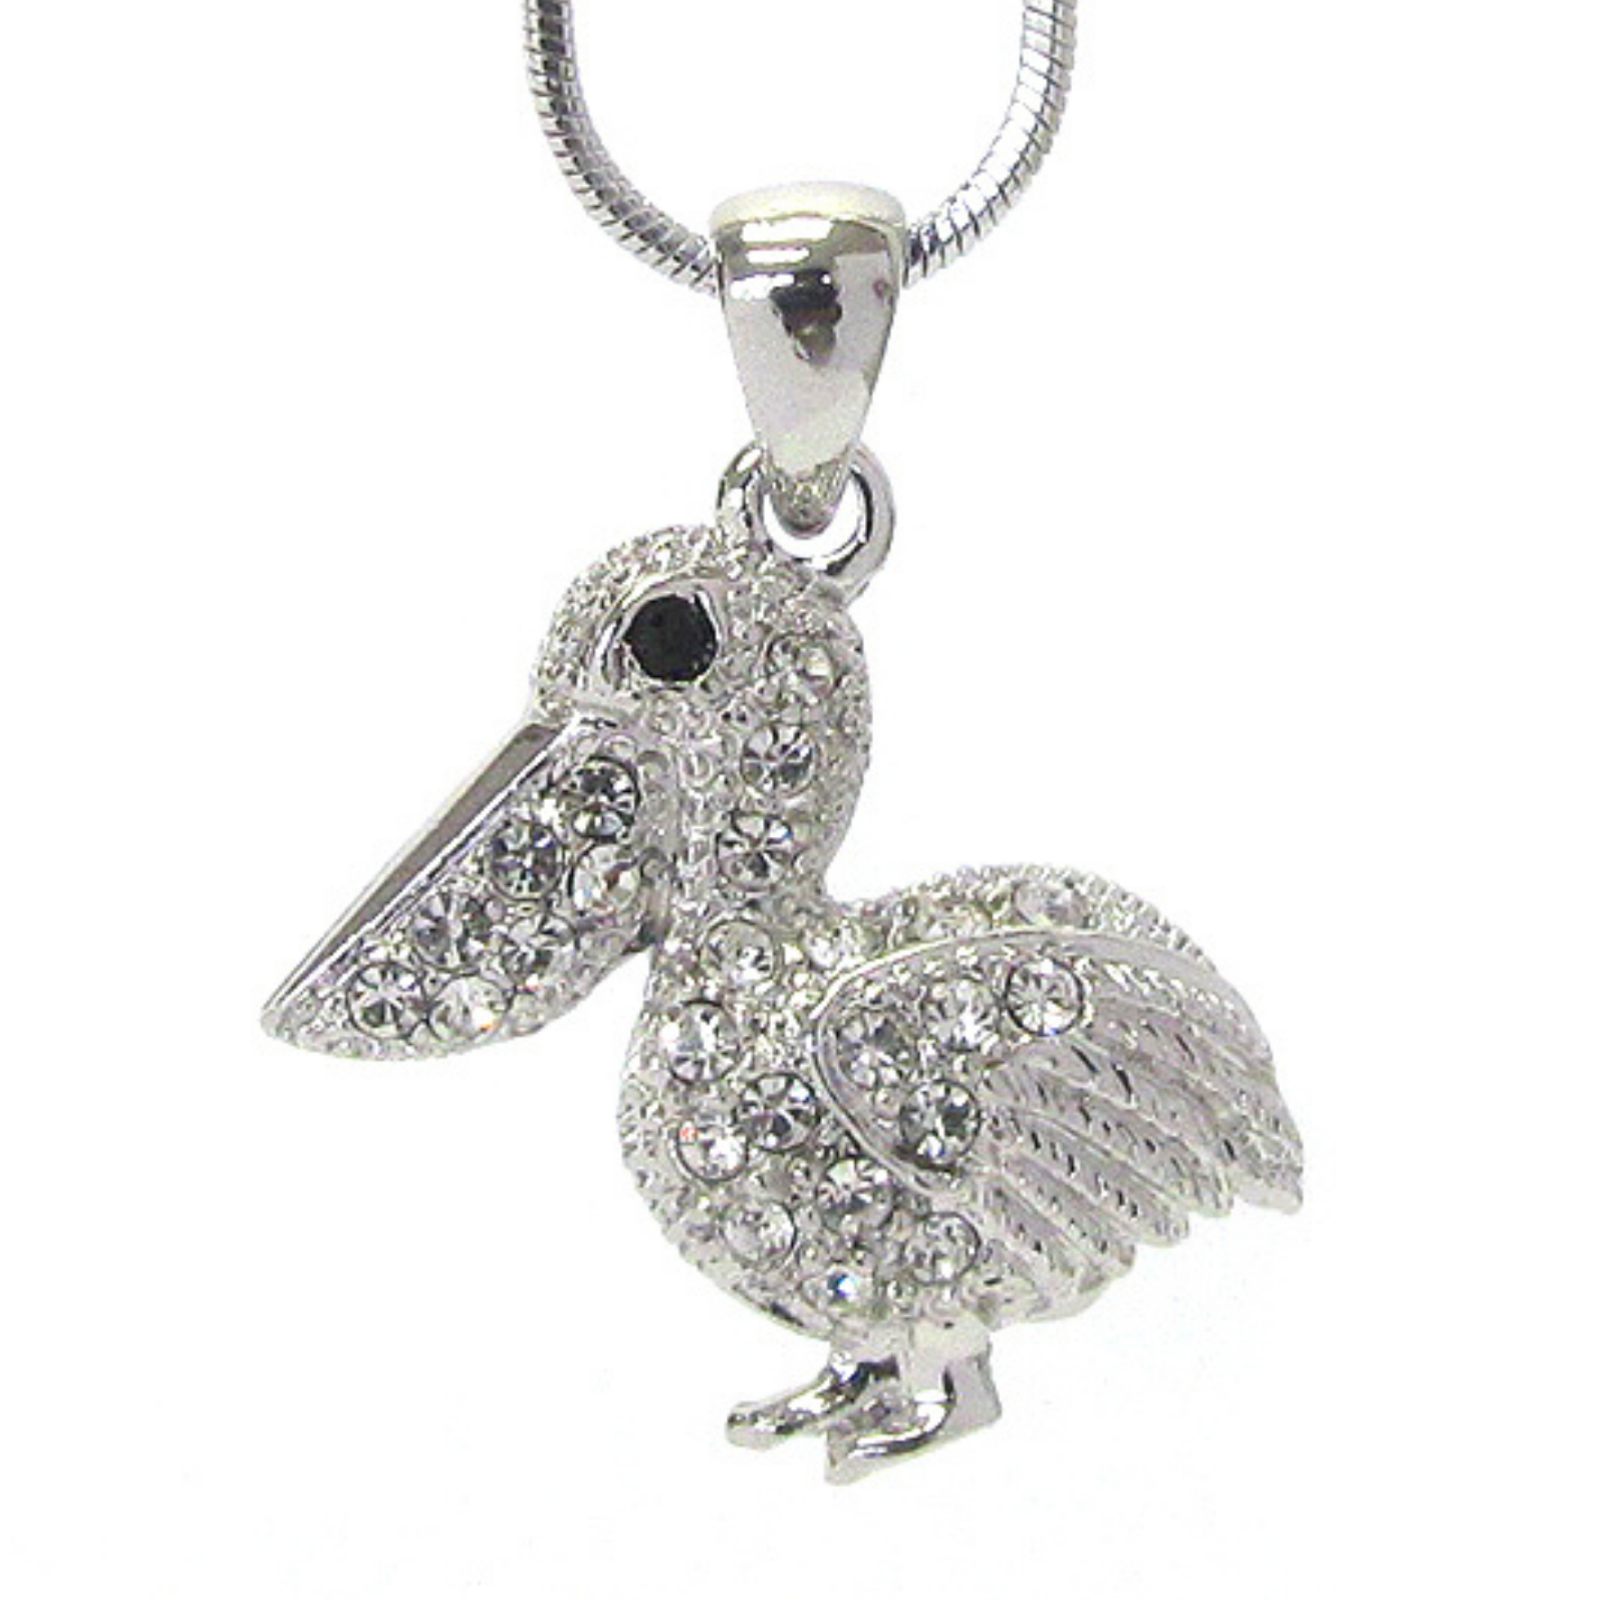 Crystal Pelican Pendant Necklace White Gold NEW